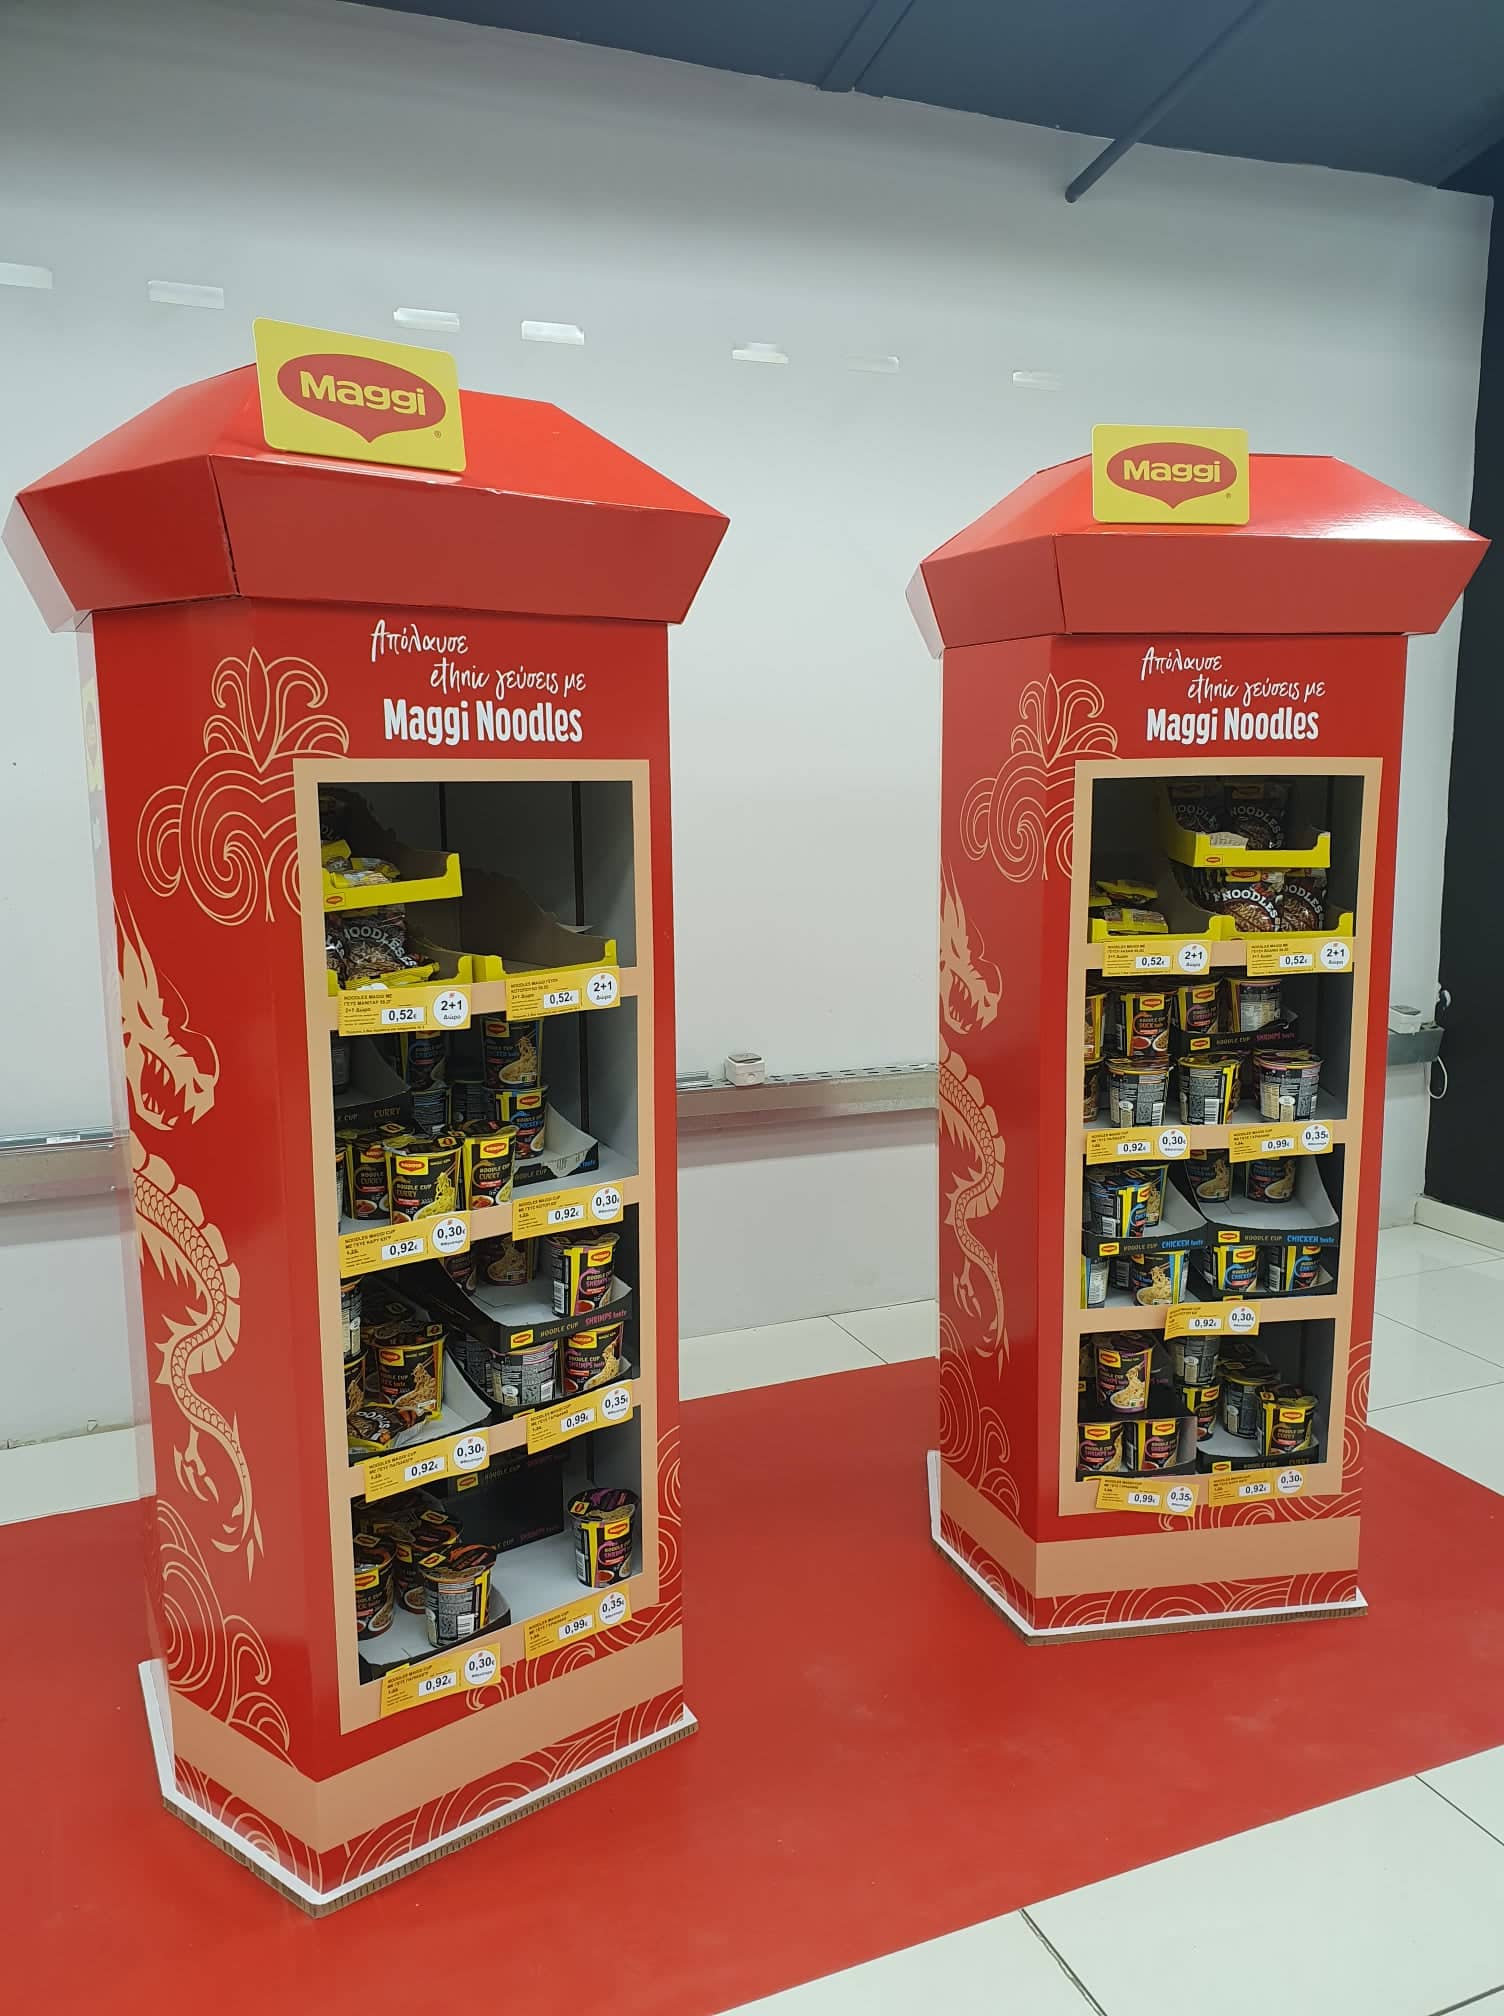 The new Maggi Noodles stands are here!